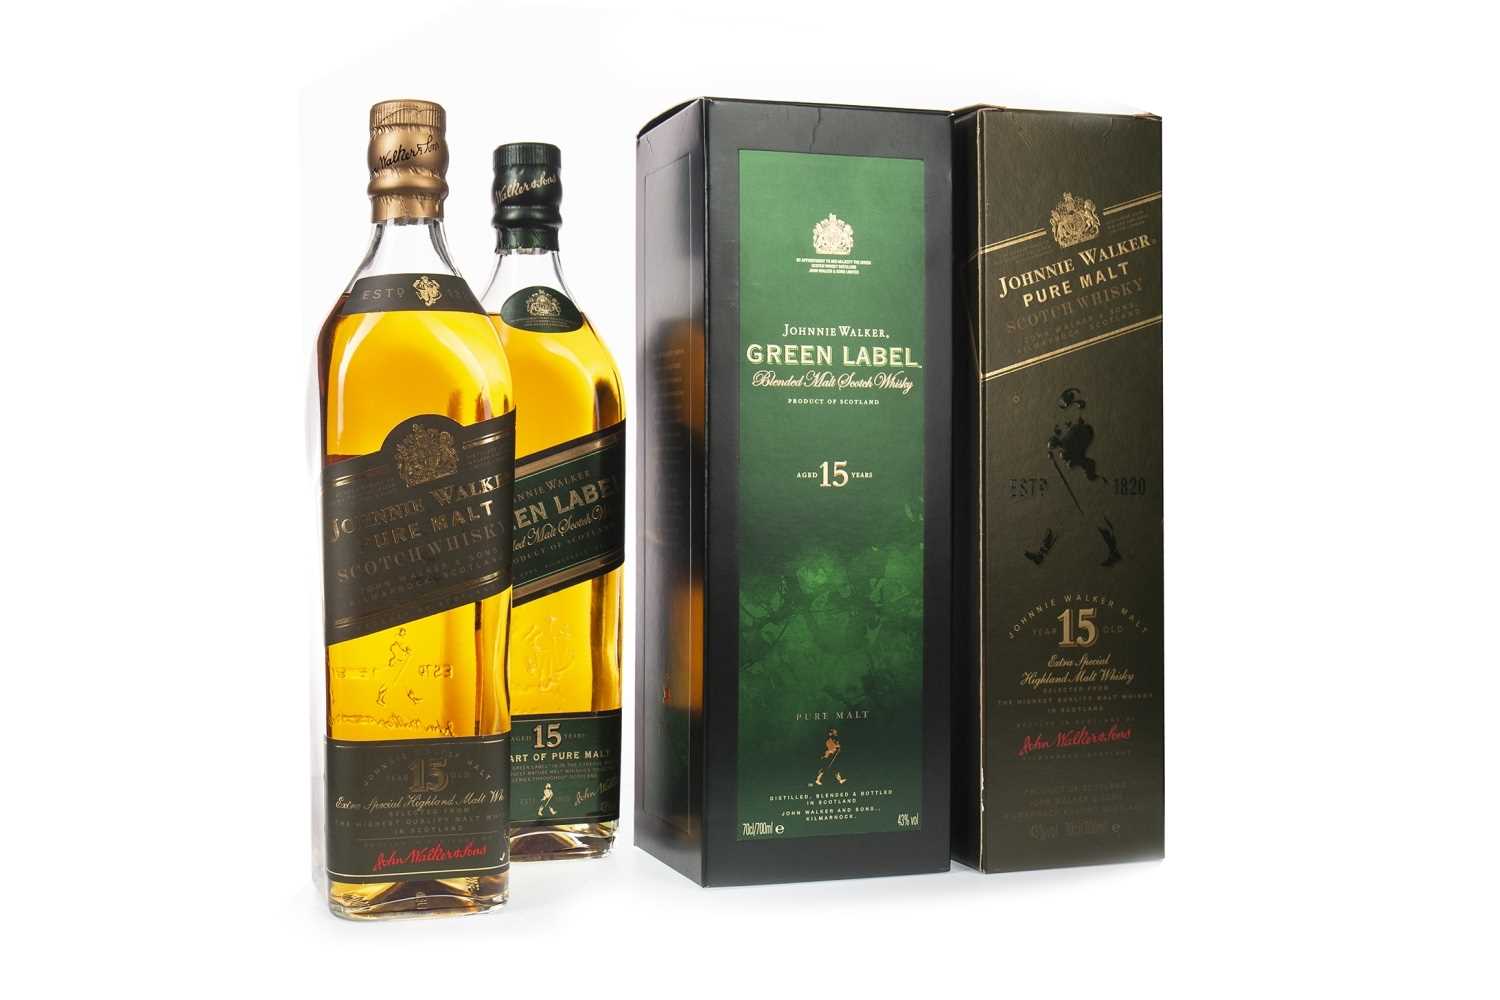 Lot 428 - TWO BOTTLES OF JOHNNIE WALKER GREEN LABEL AGED 15 YEARS